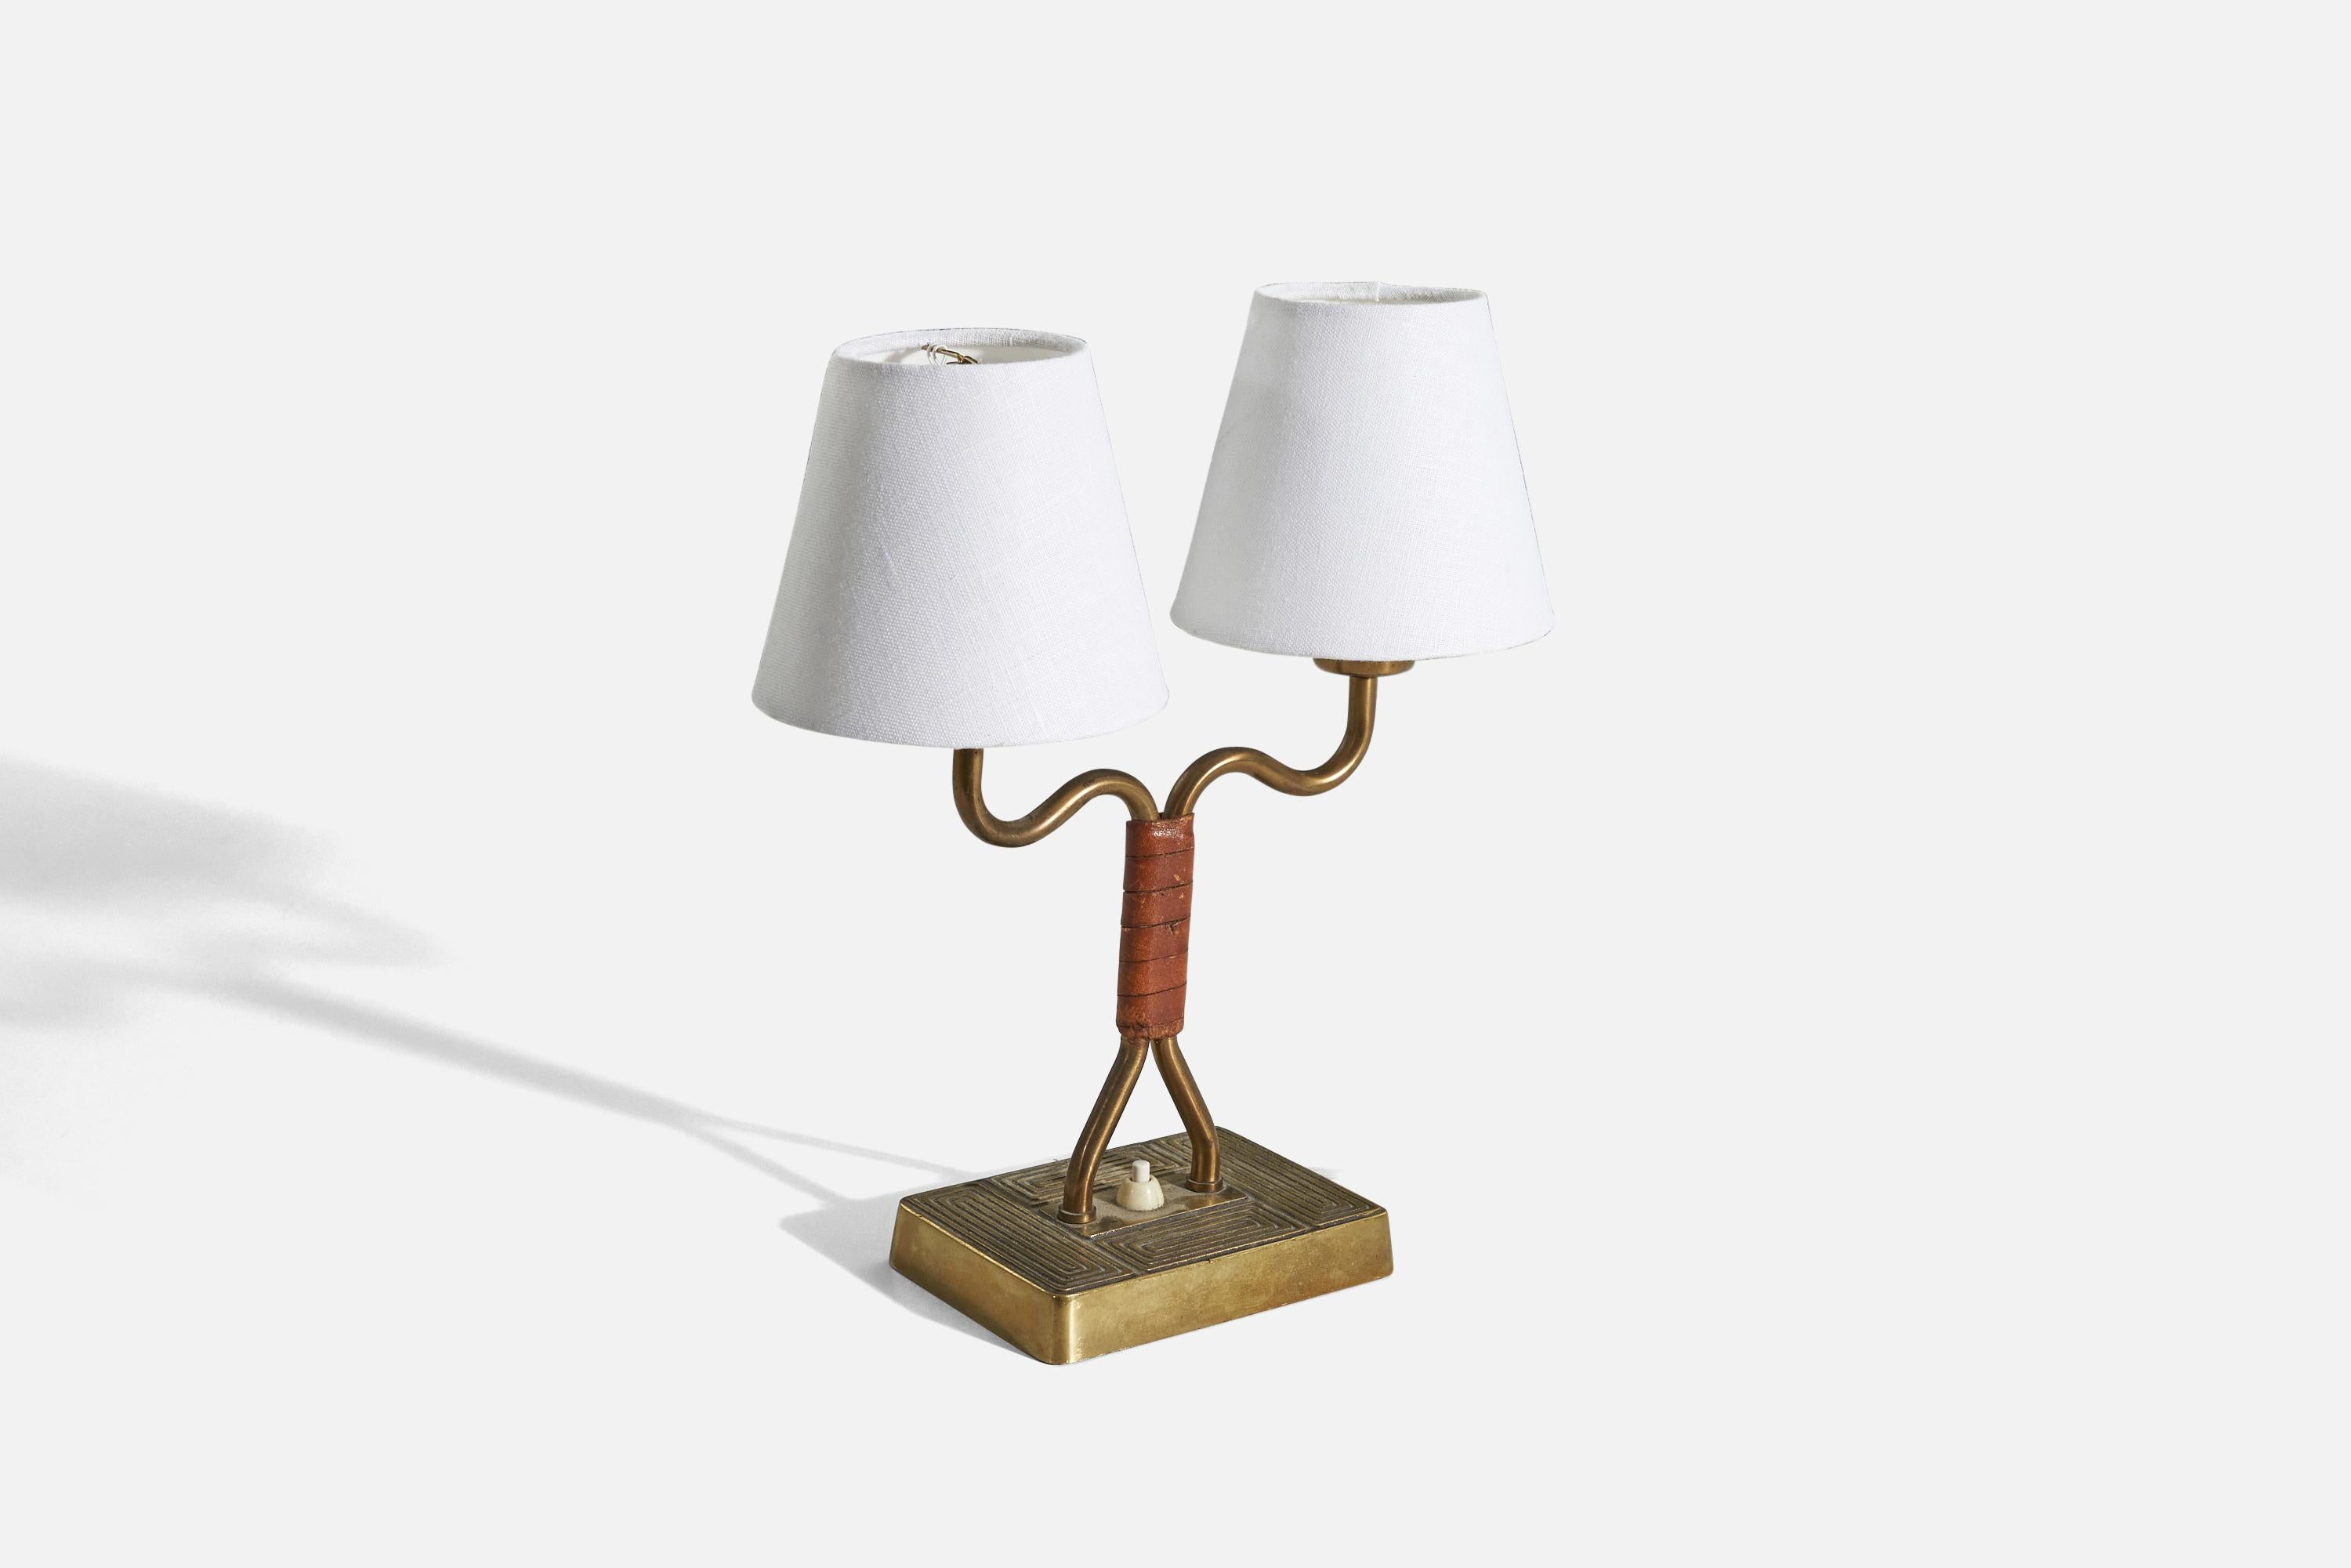 A brass and leather table lamp designed and produced in Sweden, c. 1940s.

Sold without lampshades. 
Dimensions of Lamp (inches) : 10.62 x 8.5 x 4.25 (H x W x D)
Dimensions of Shade (inches) : 3 x 5 x 4.5 (T x B x S)
Dimension of Lamp with